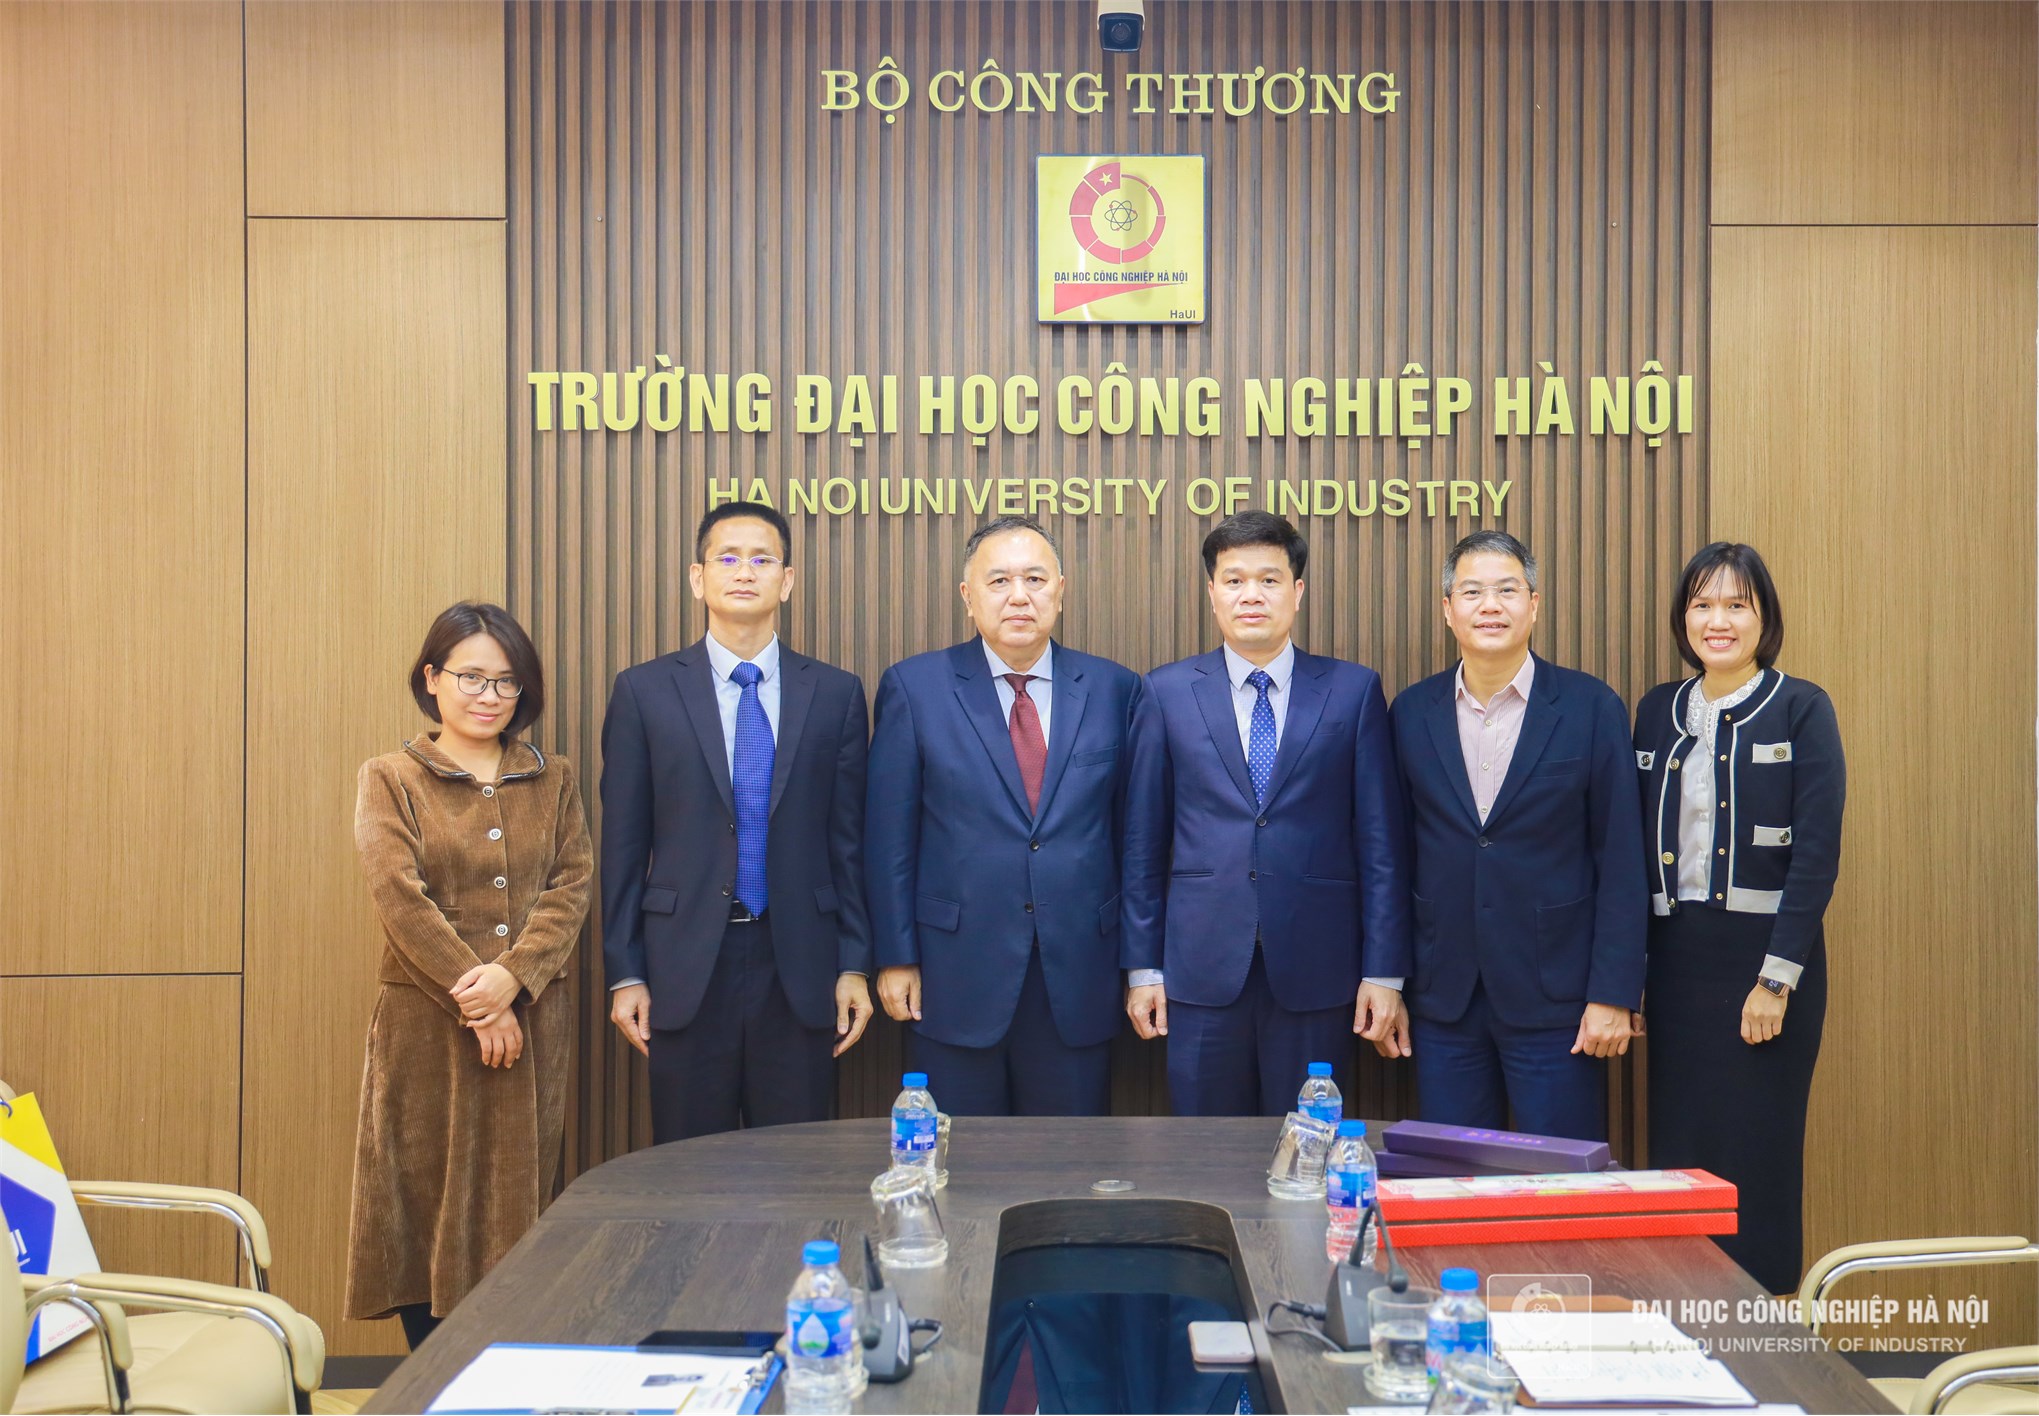 Education Counselor of the Chinese Embassy paid a working visit to Hanoi University of Industry